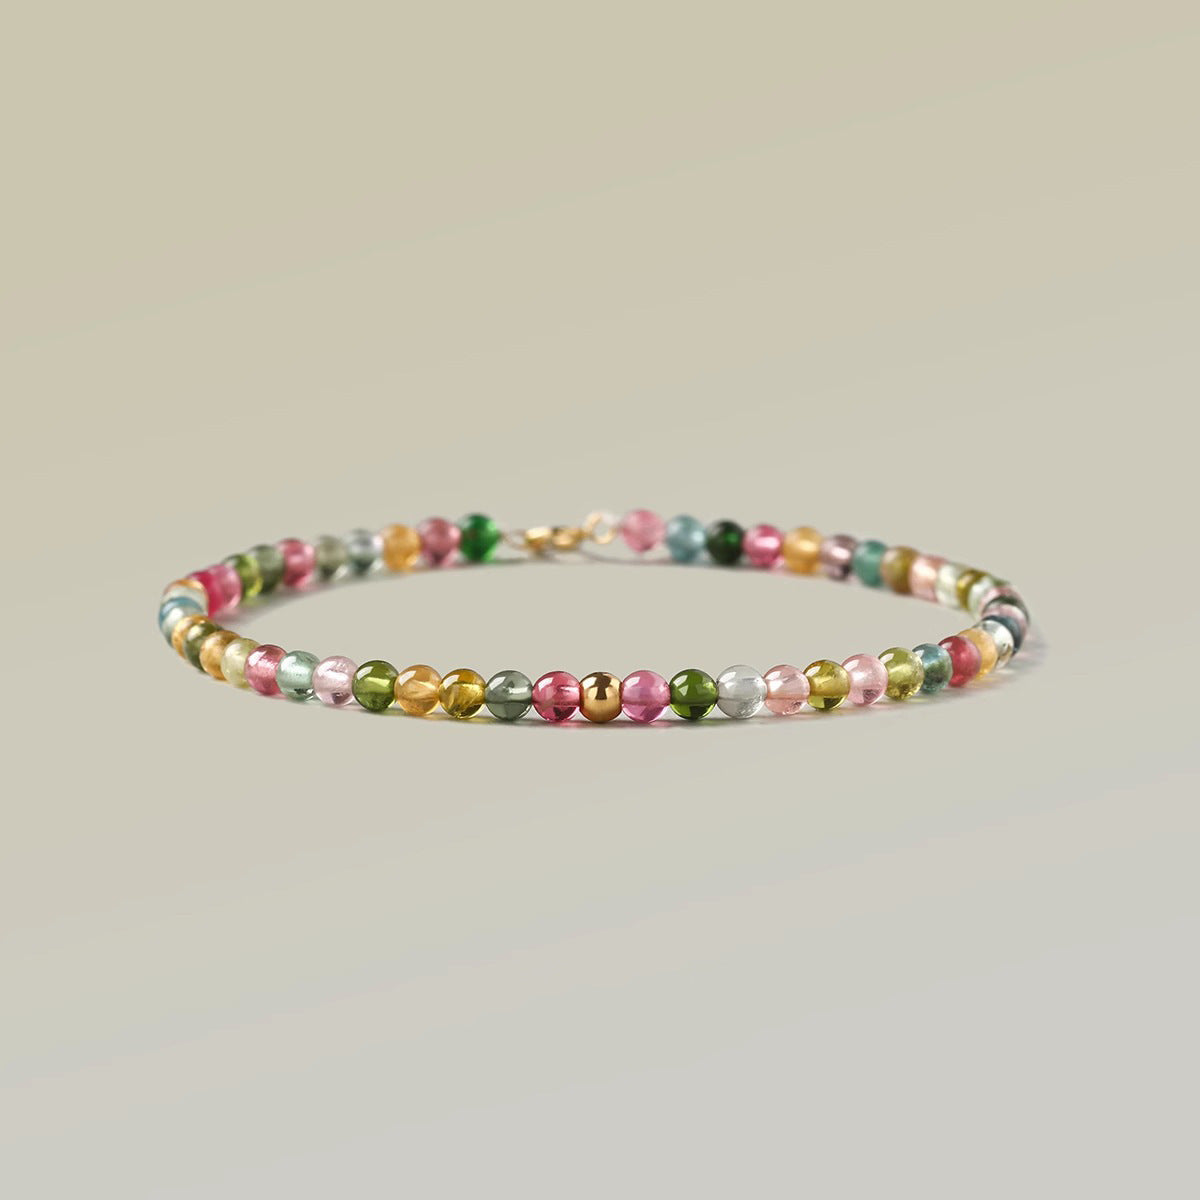 Colorful Tourmaline Bracelet from Fortune's Favor Collection